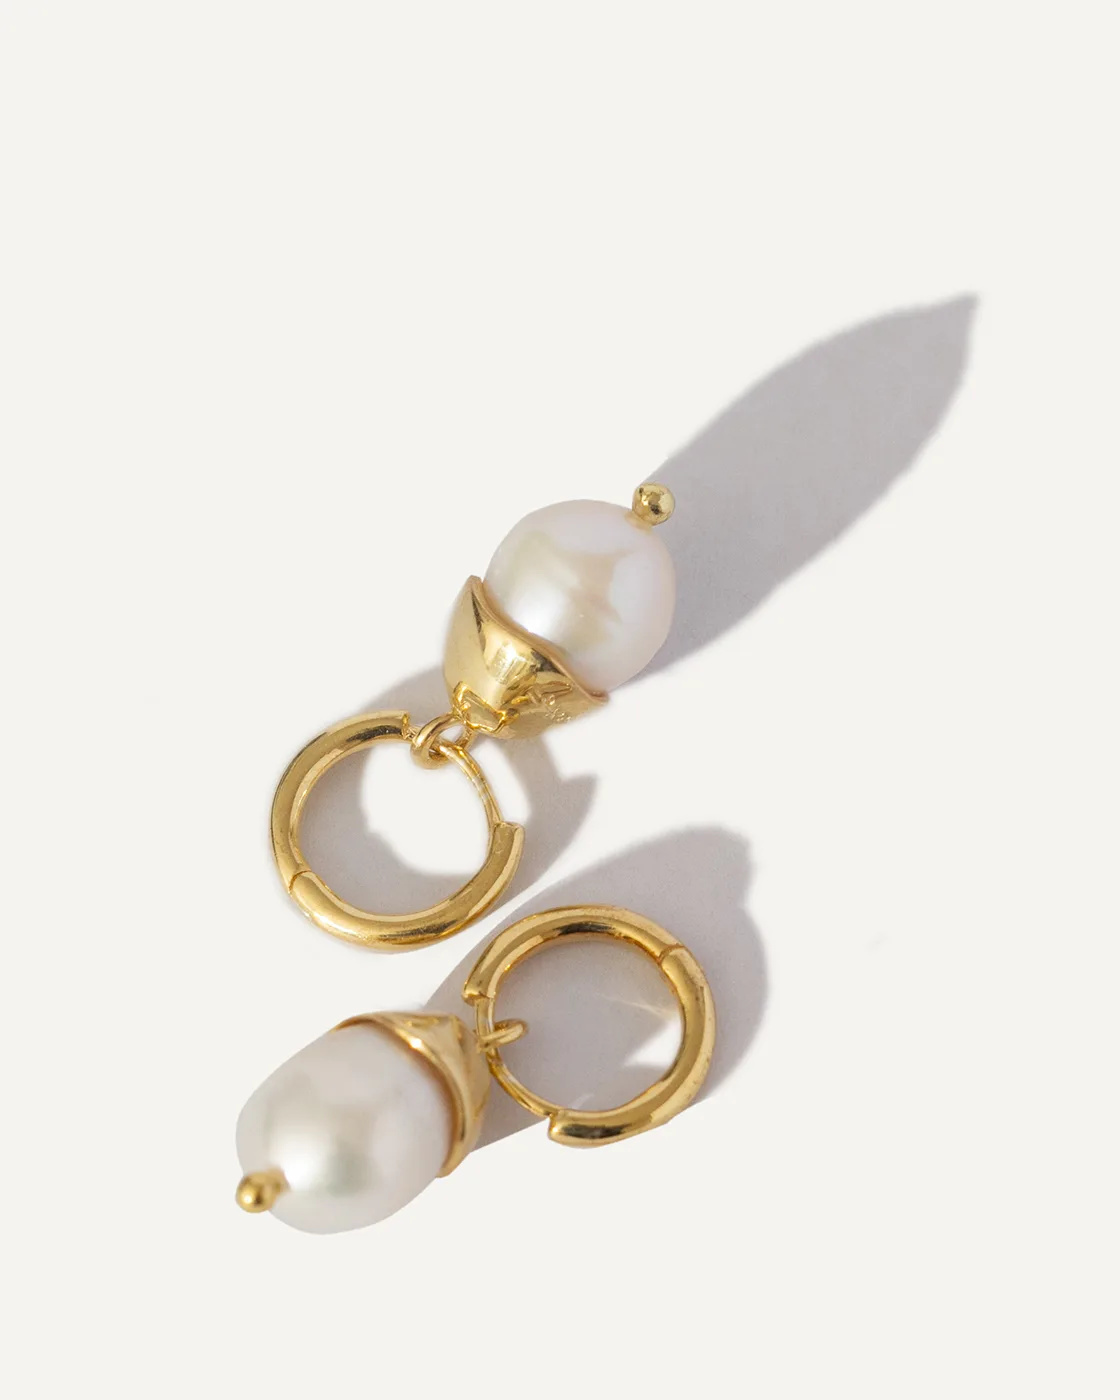 Perla Gold-Plated Sterling Silver Hoop Earrings with an Irregular Pearl